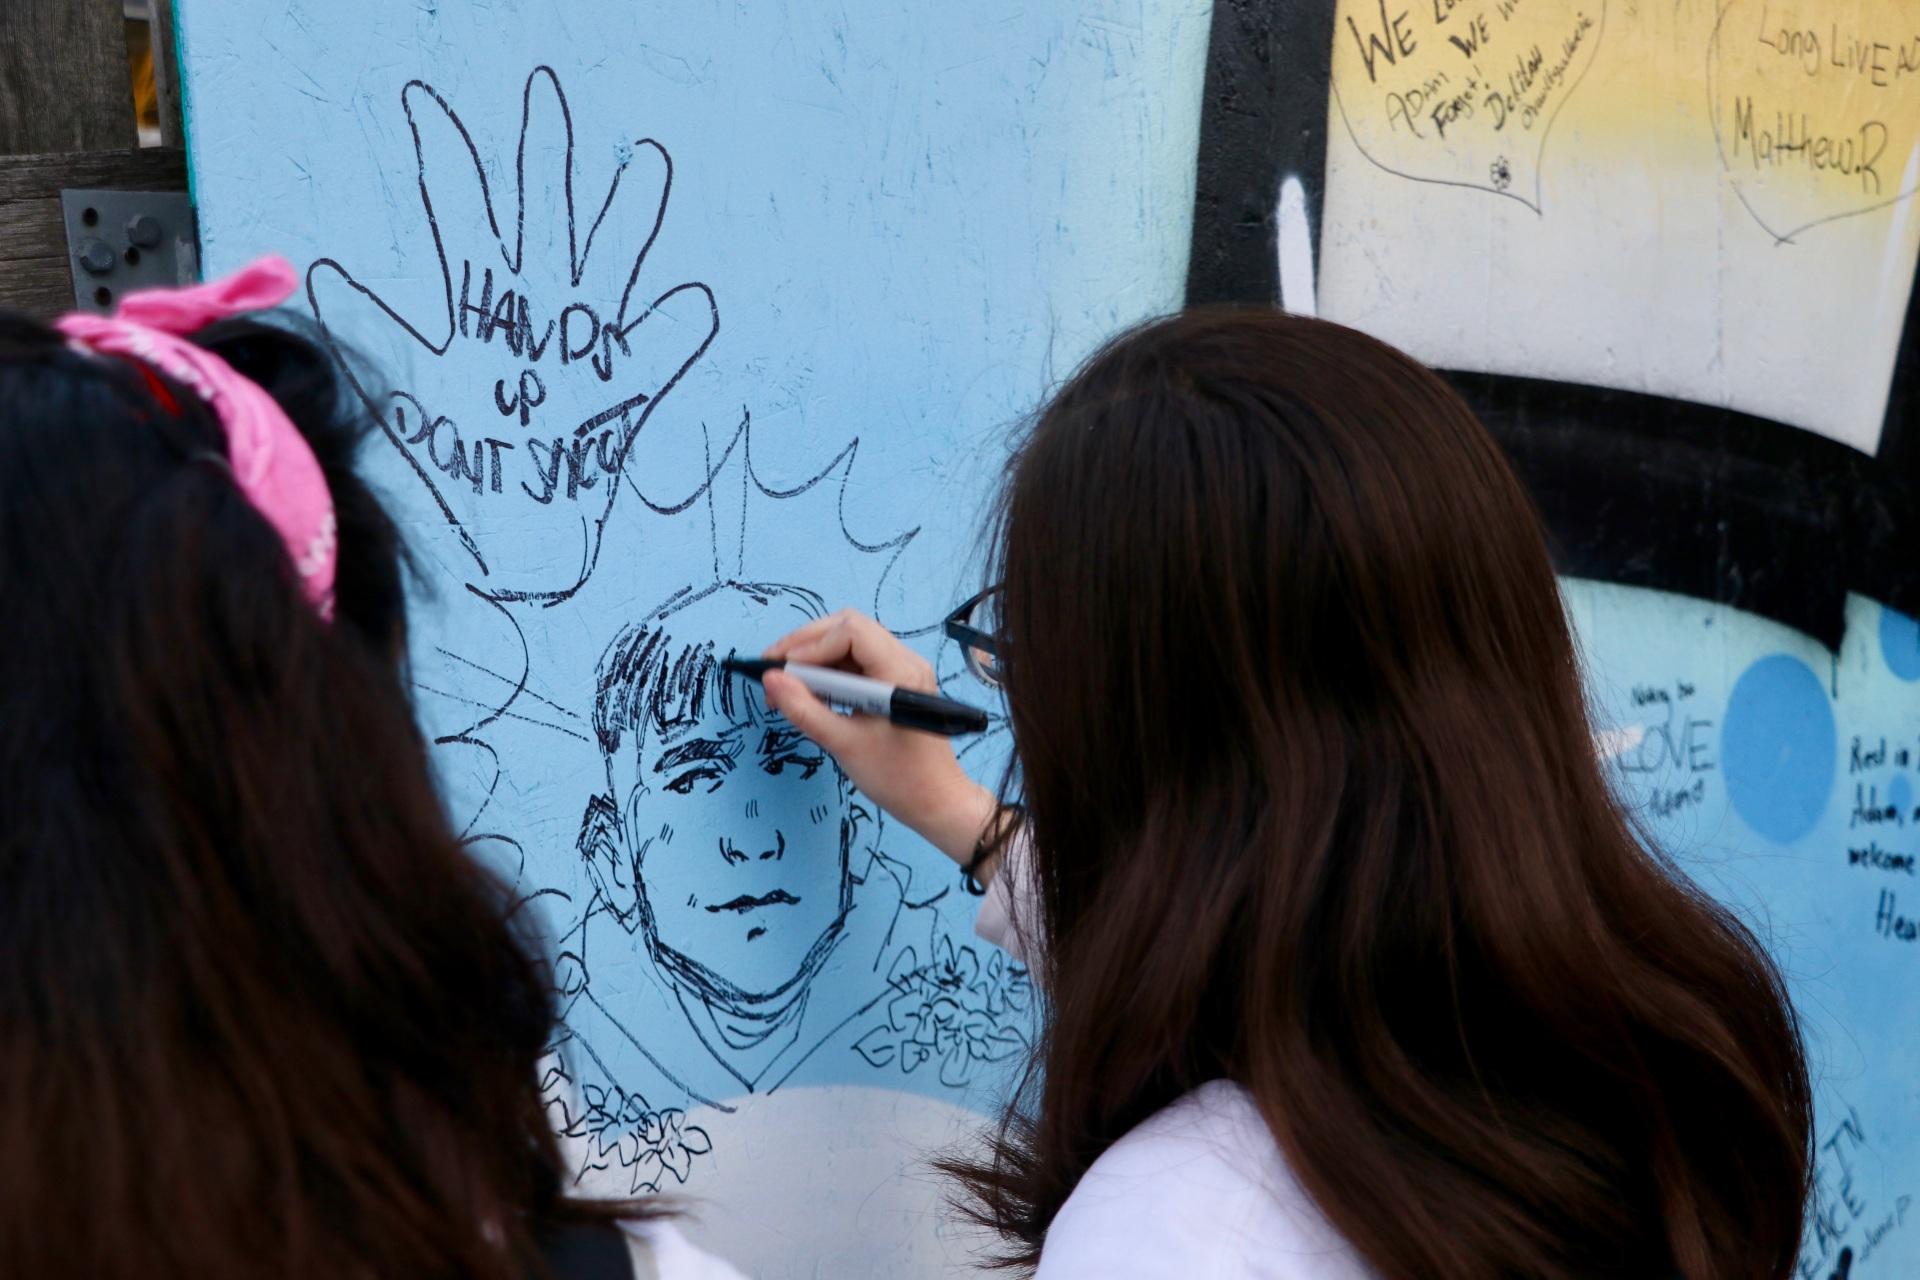 During a peace walk in honor of Adam Toledo on April 18, 2021, an attendee draws a portrait of 13-year-old Adam Toledo on a mural near where Toledo was fatally shot by a police officer on March 29, 2021. (Evan Garcia / WTTW News)